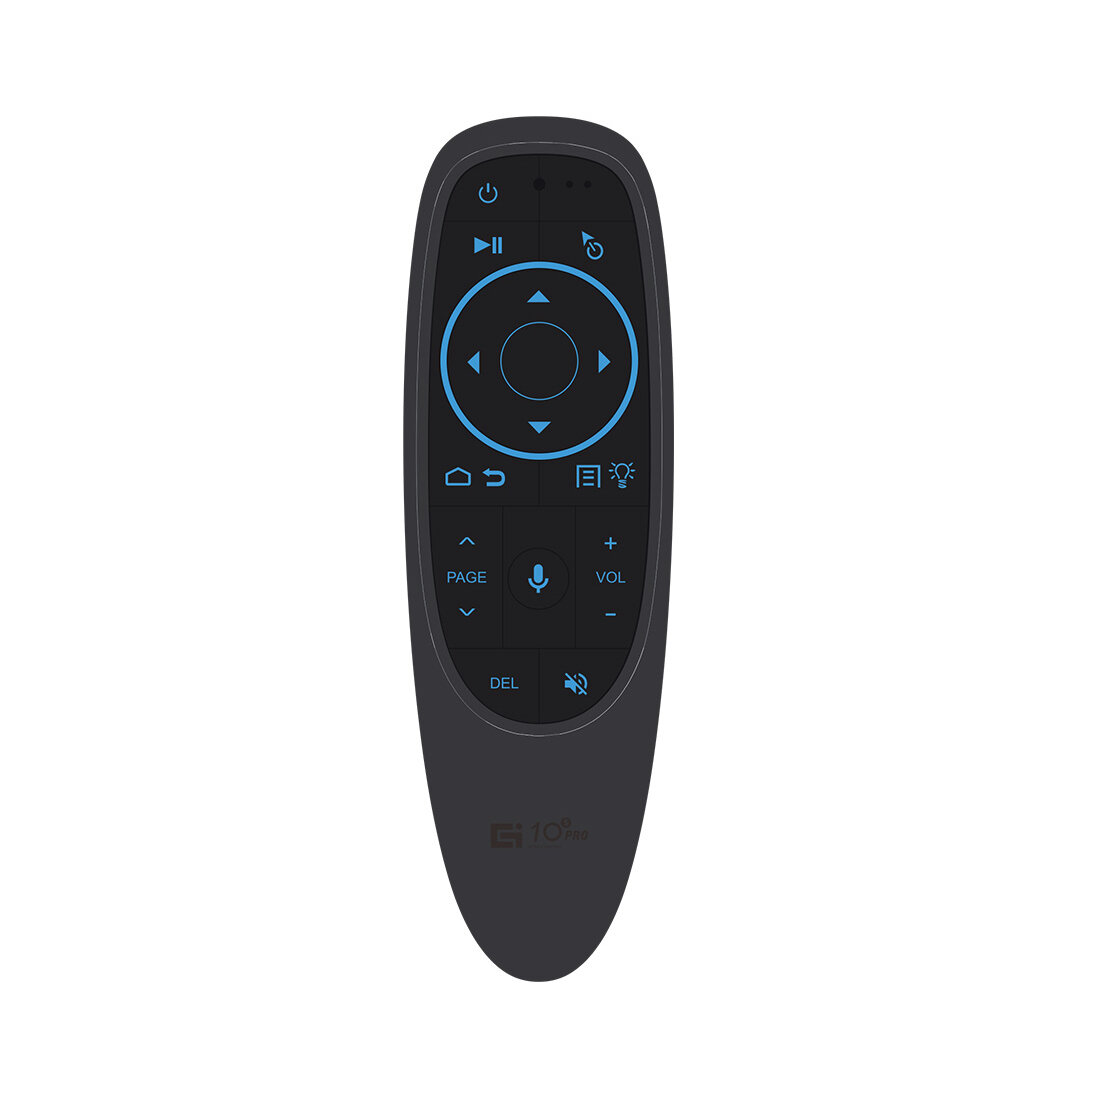 G10S Pro BT Air Mouse Voice Control 2.4G Wireless Bluetooth 5.0Smart Remote Control for Google Assis